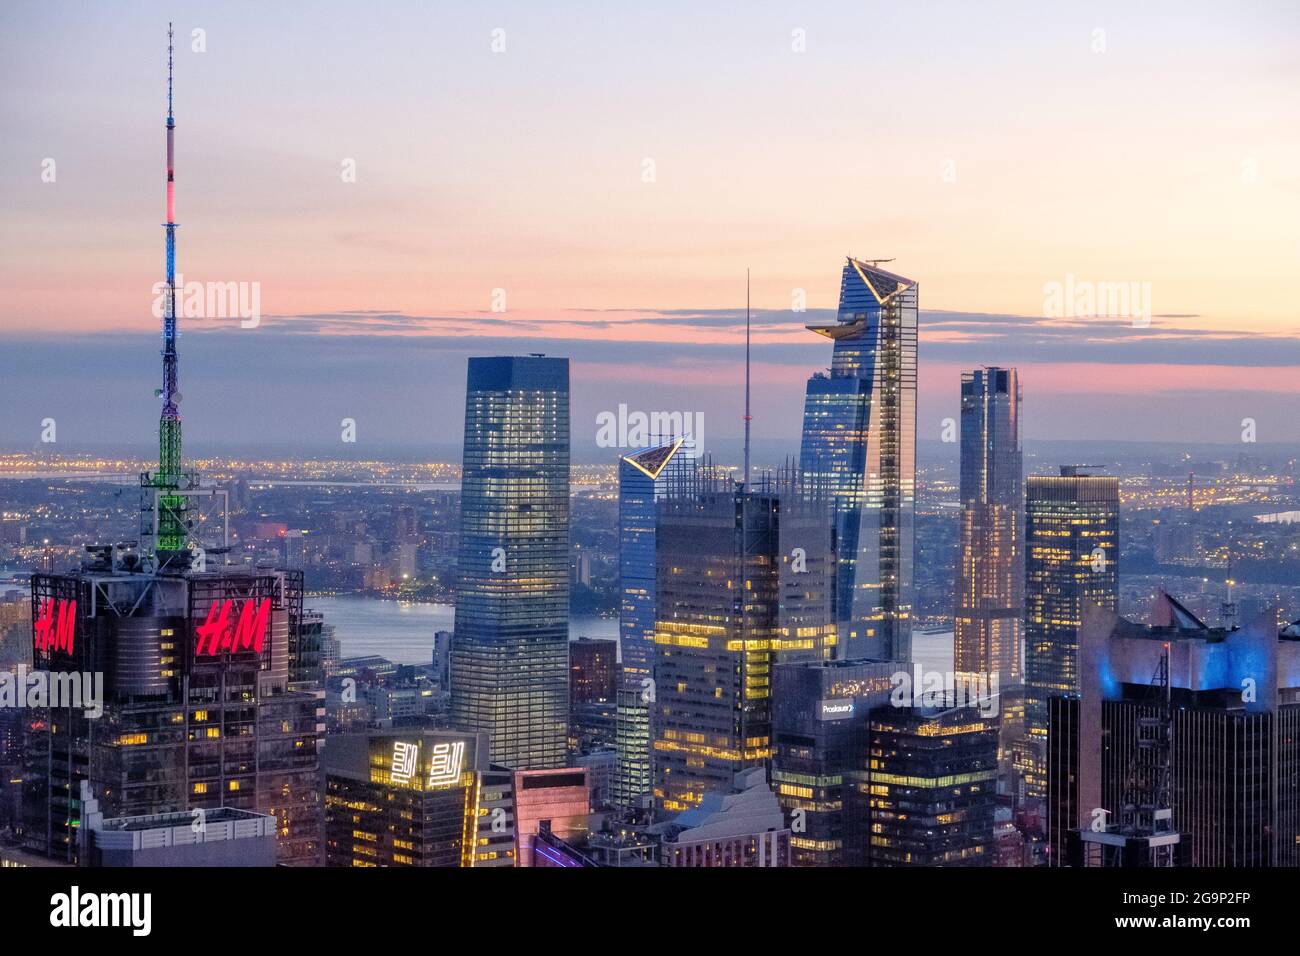 hudson yards at sunset from the rockefeller center in new york city Stock Photo